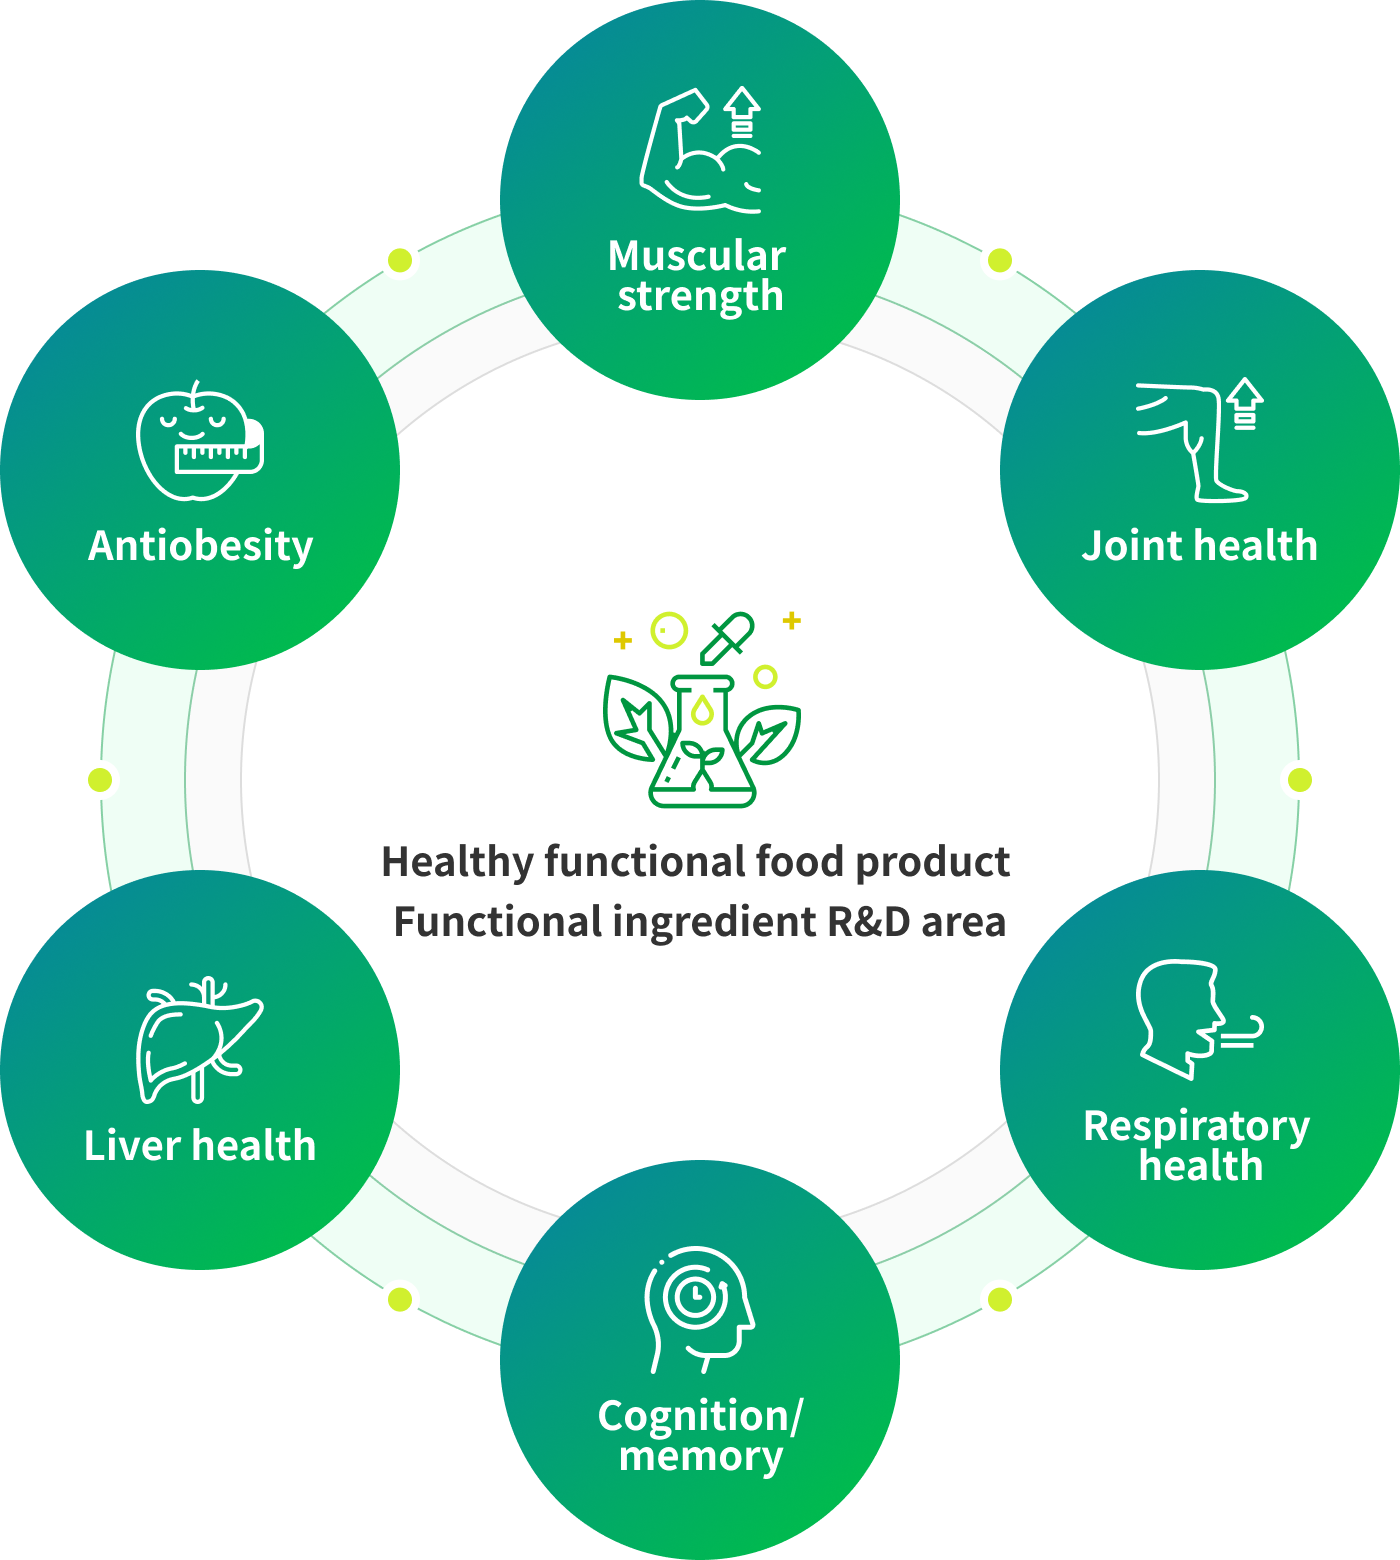 Healthy functional food product Functional ingredient R&D area - Muscular strength, Joint health, Respiratory system health, Cognition/memory, Liver health, Antiobesity